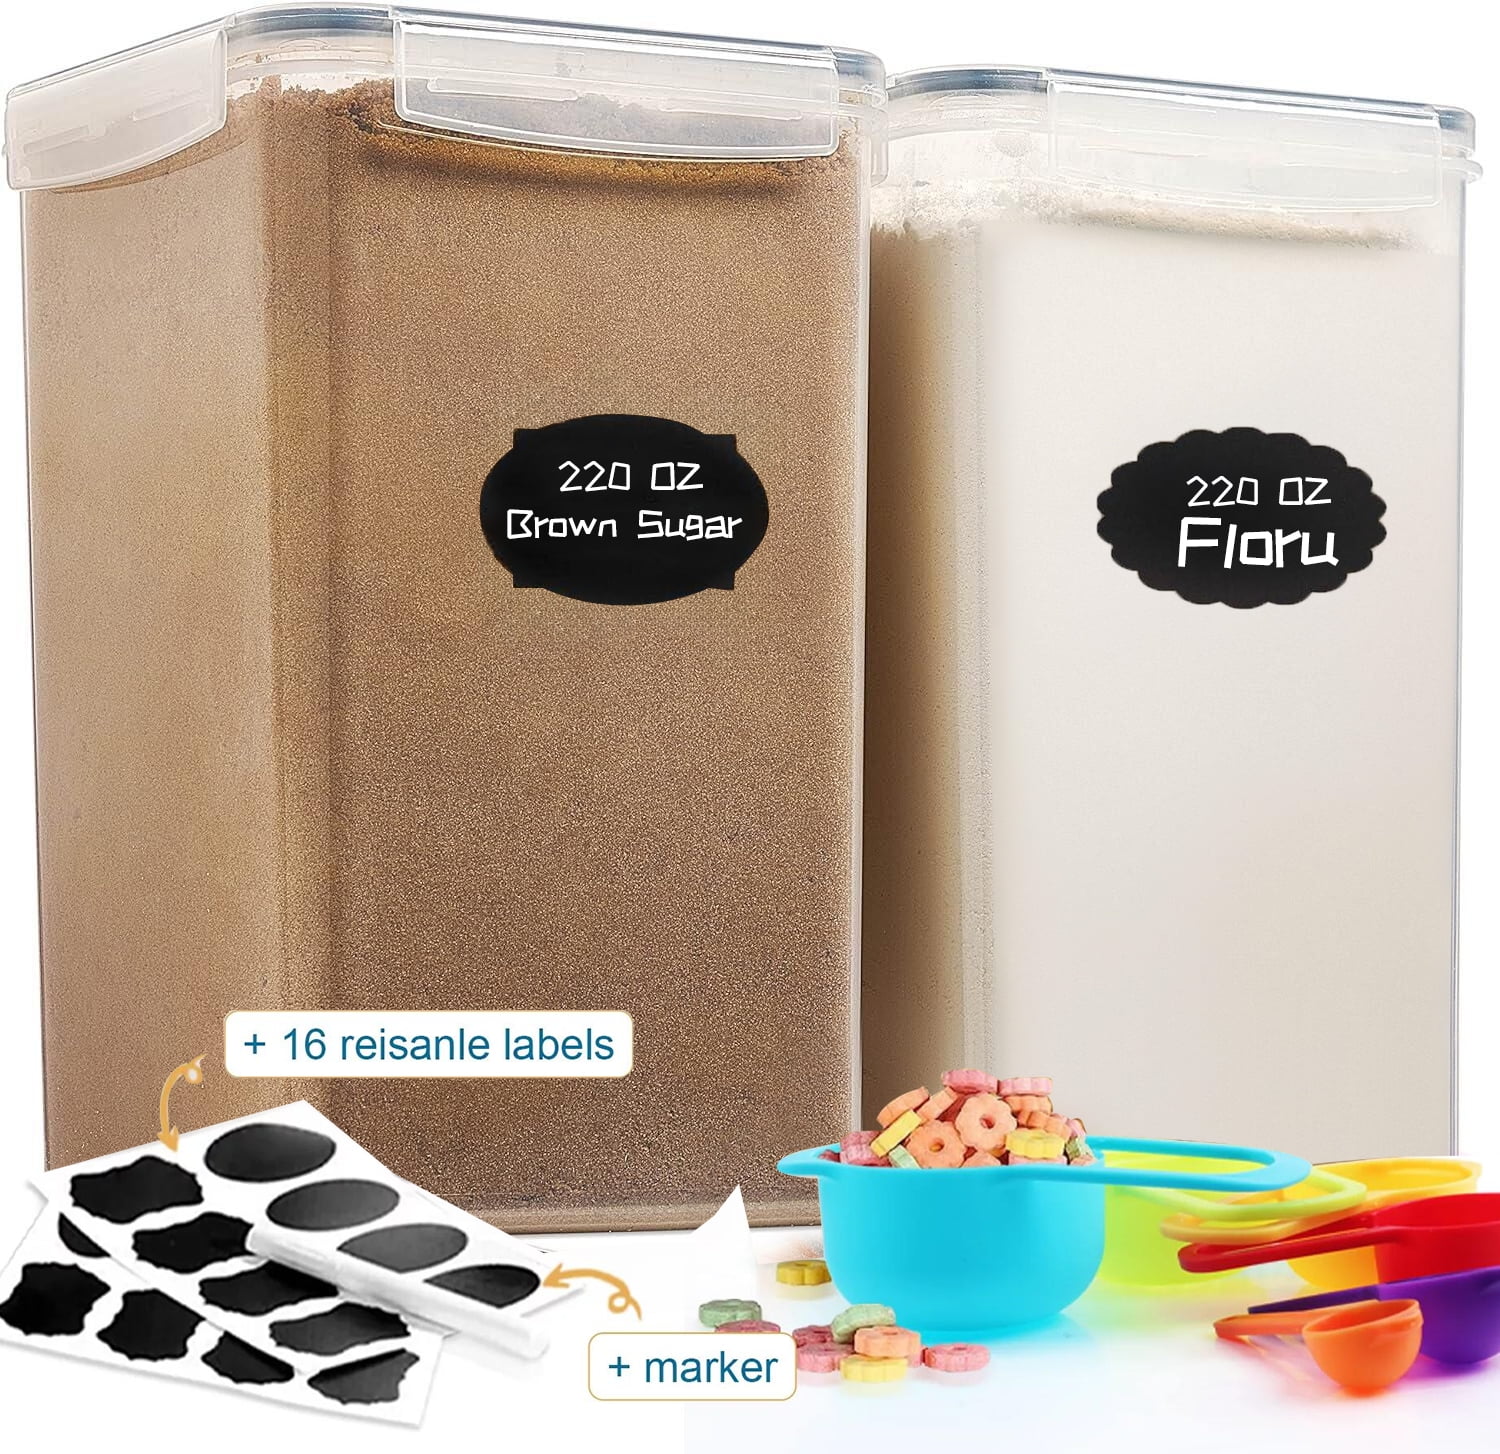 Large Airtight Food Storage Containers with Lids, Plastic Airtight Canisters for Flour, Sugar, Rice, Food Storage for Kitchen Pantry Organization 2